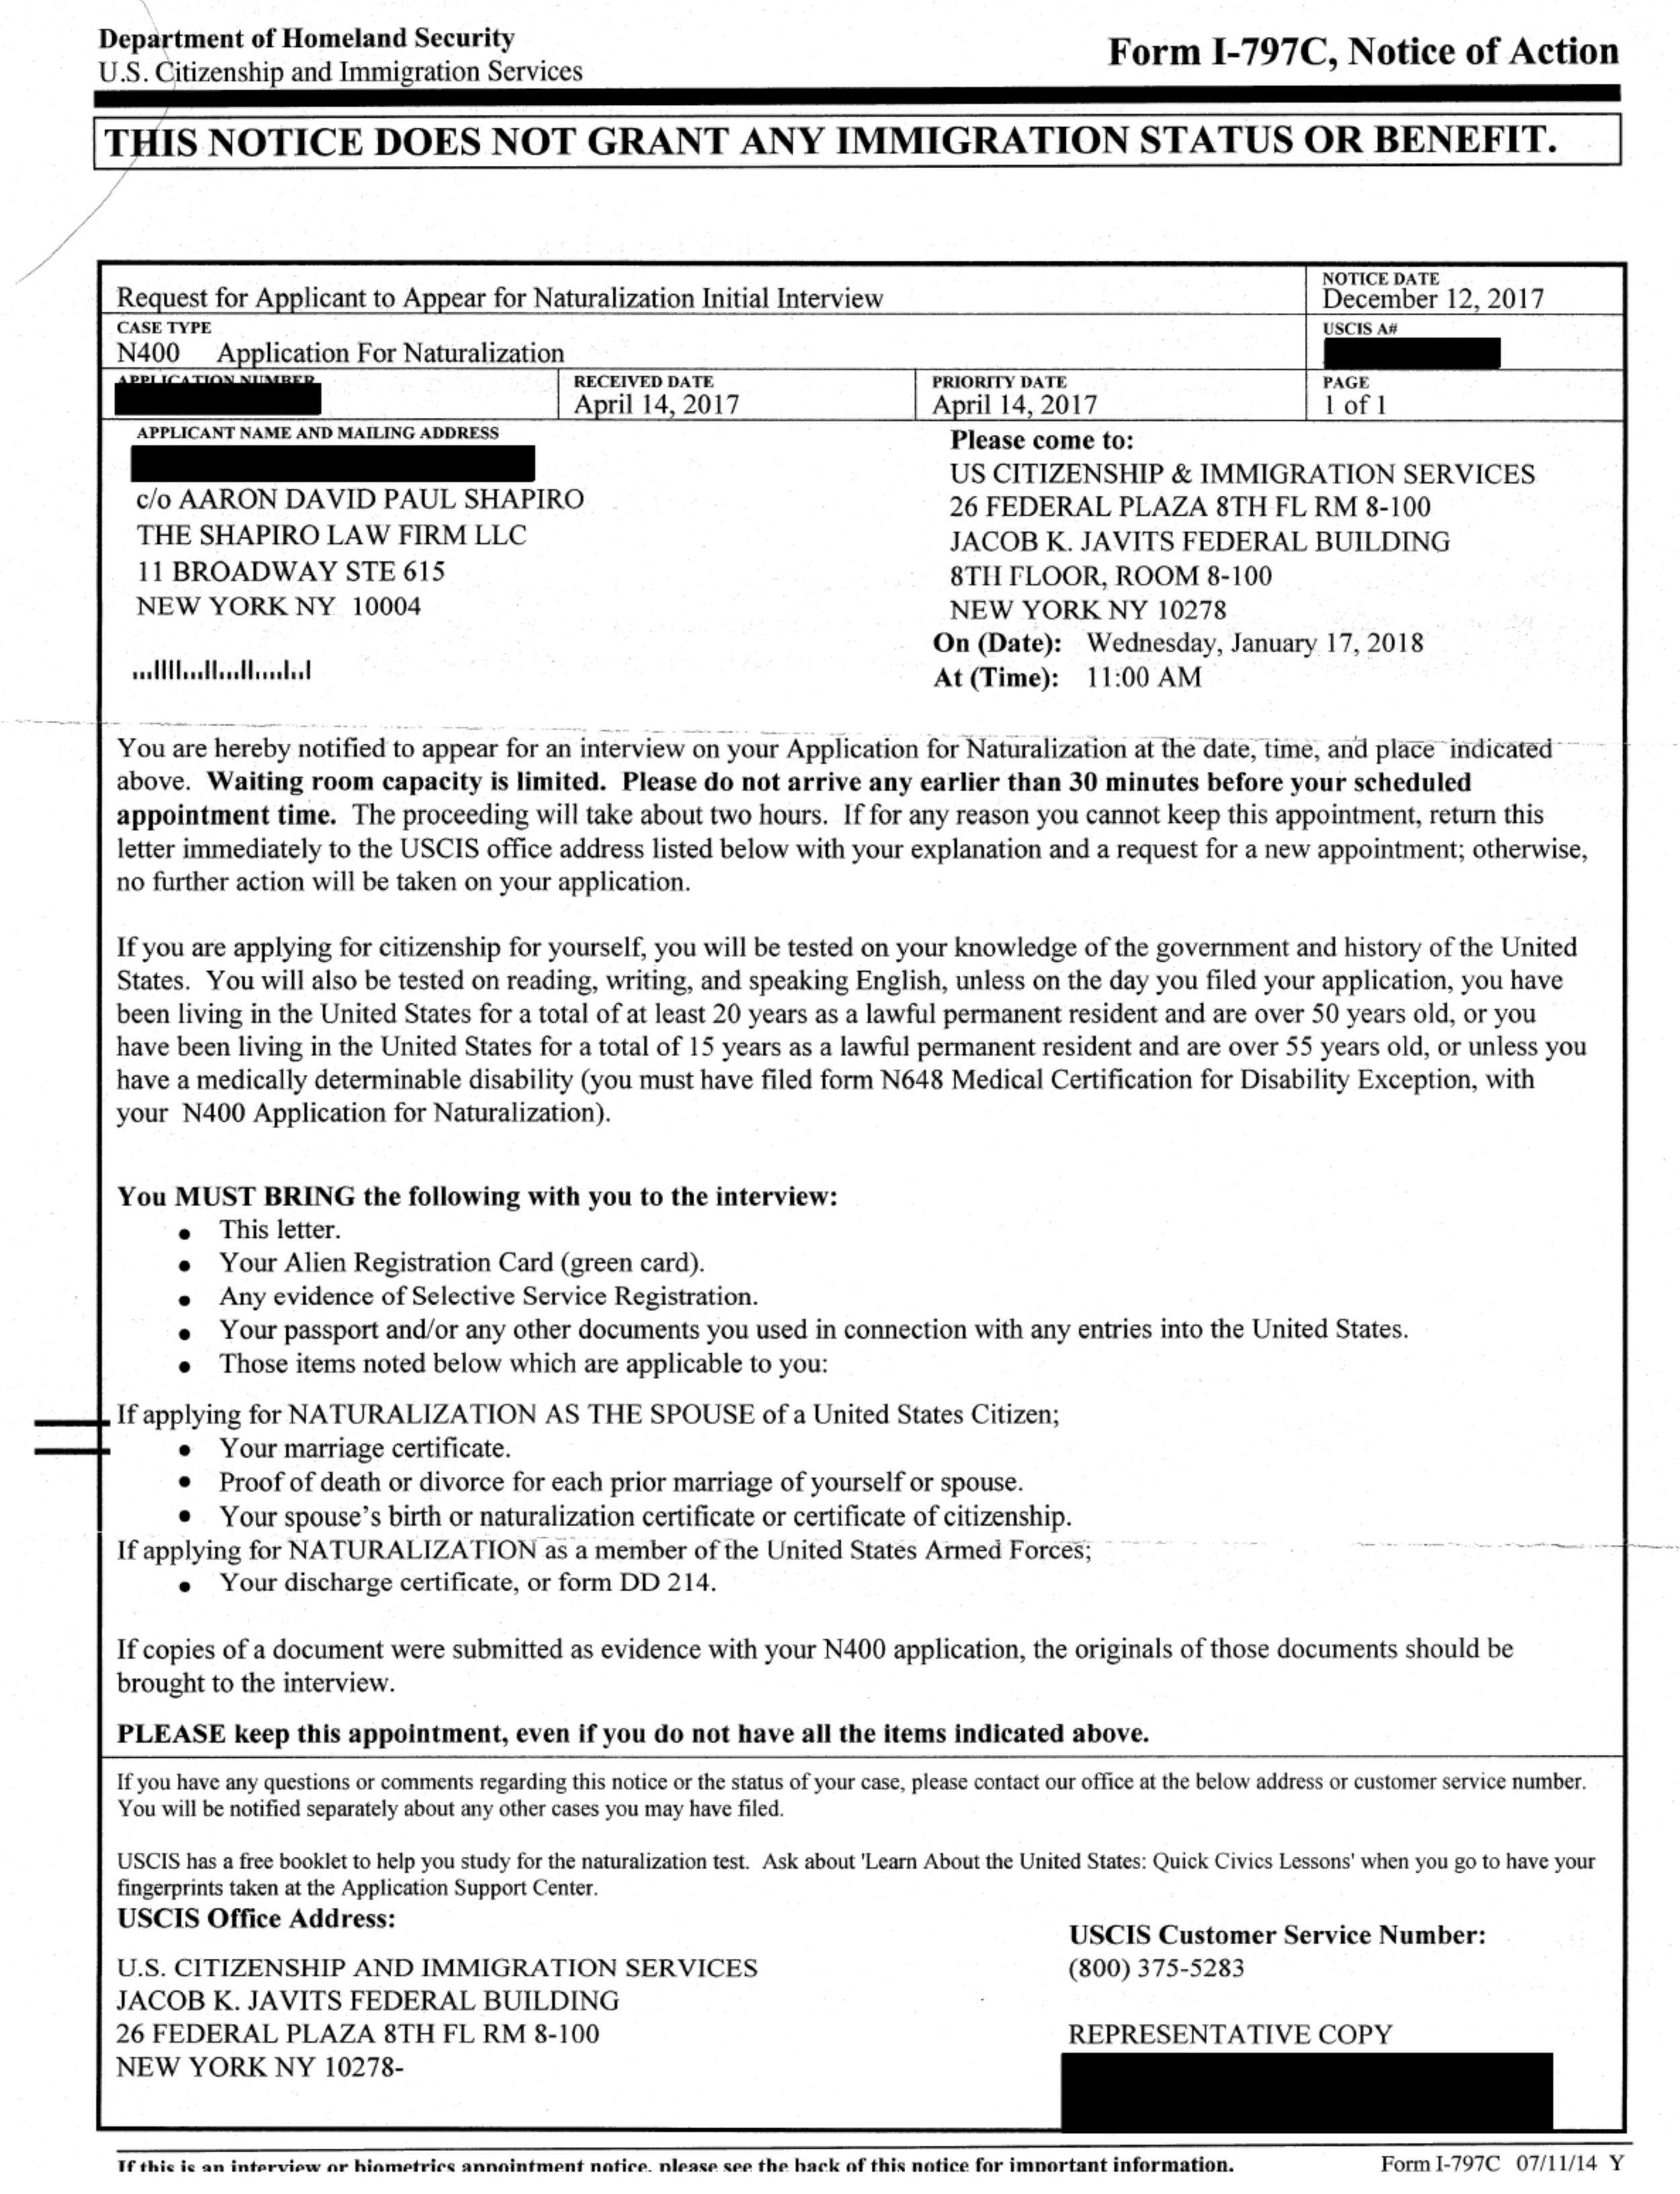 I-797C, Notice of Action - Naturalization Oath Ceremony Letter